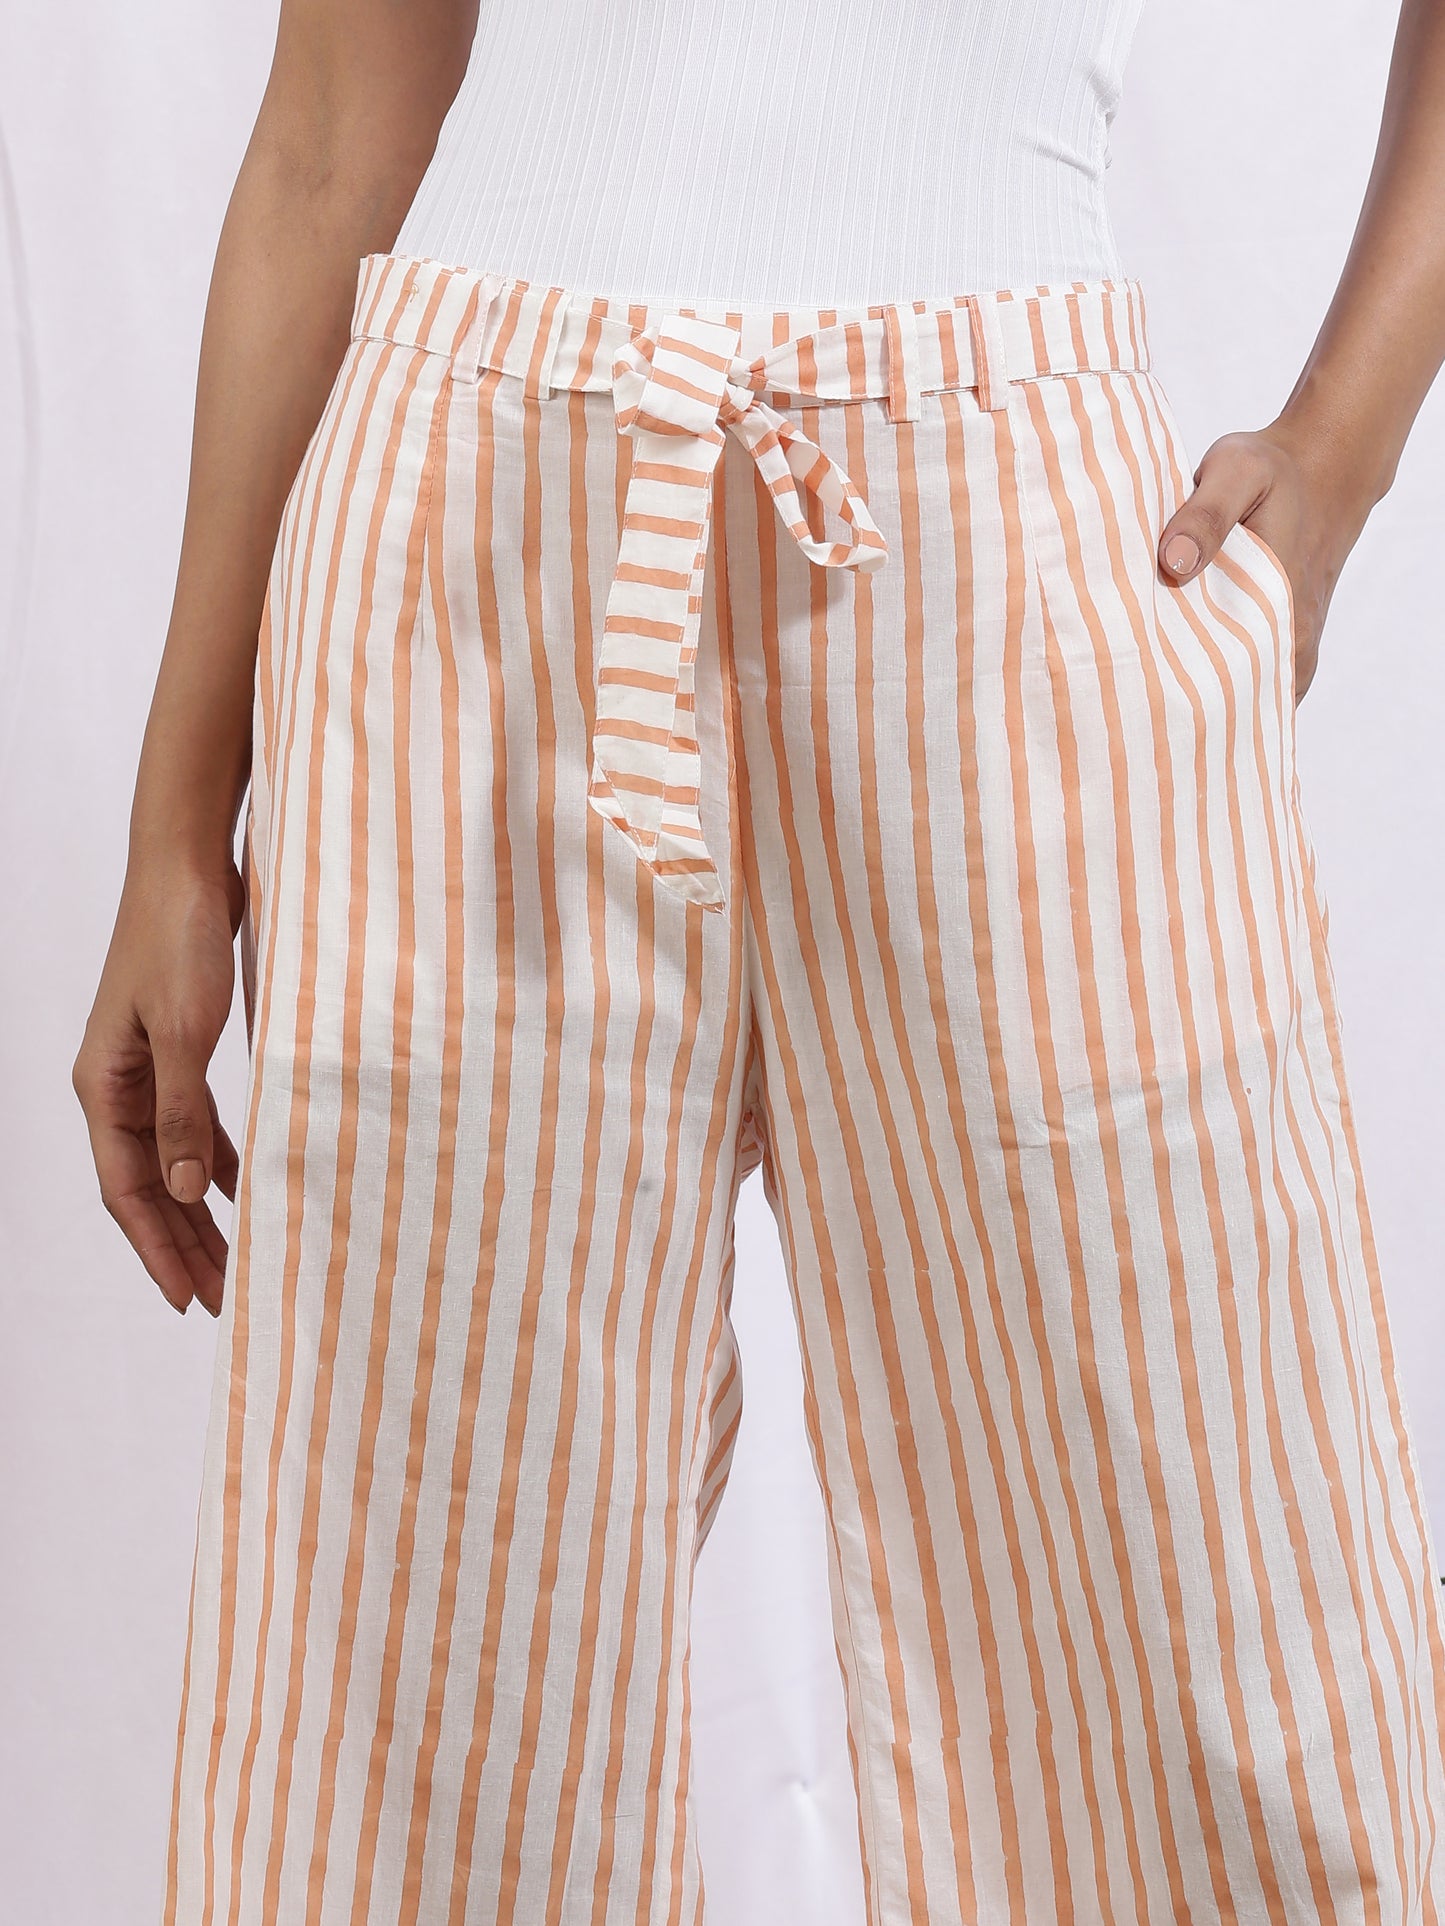 Mangue Stripe Pants - Yellow & White Hand Block Printed Cotton Pants With Tie Knot